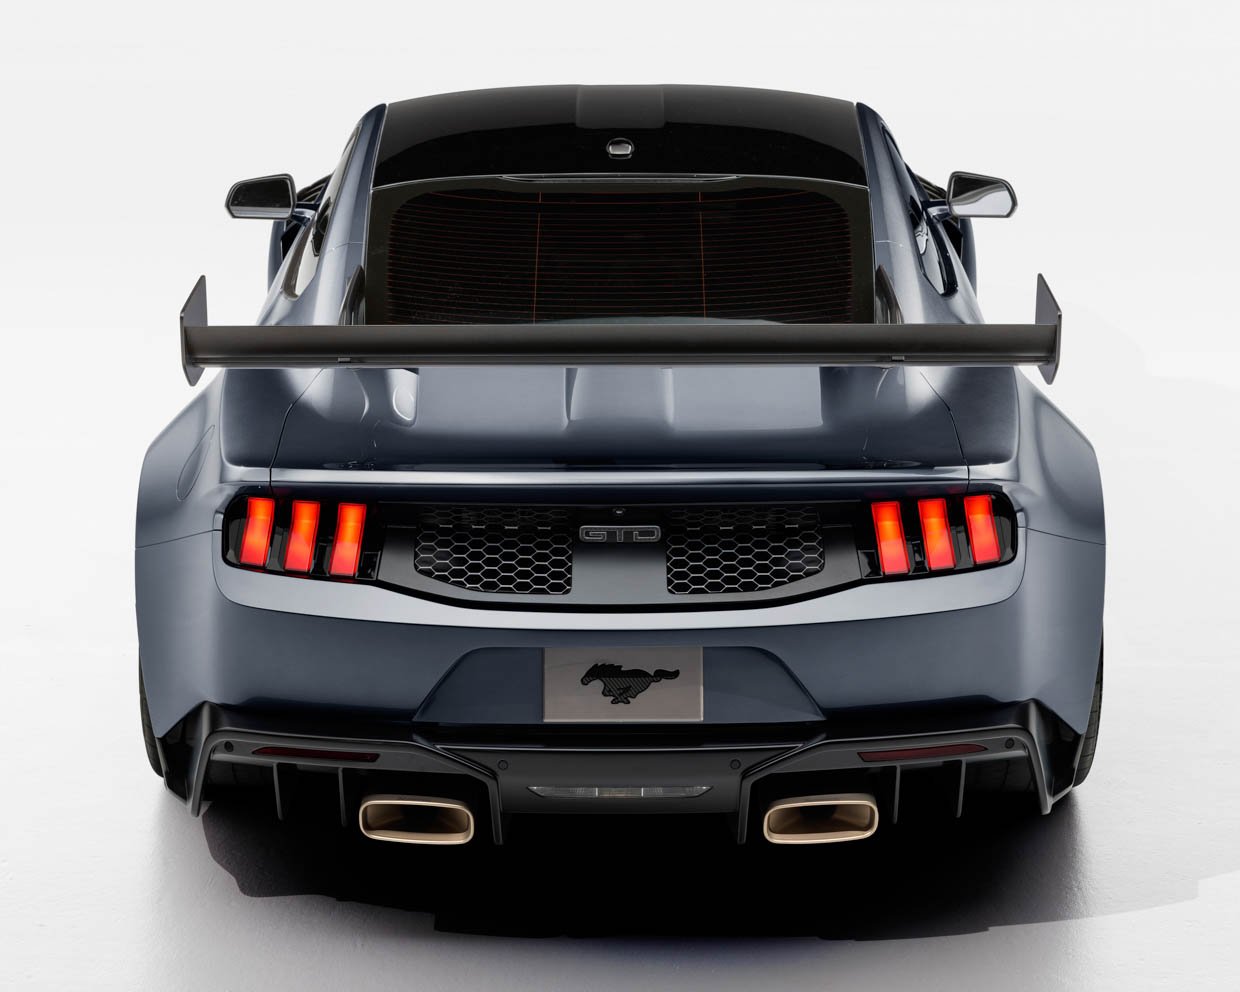 The 2025 Ford Mustang GTD Has 800 Horsepower, a Carbon Fiber Body, and